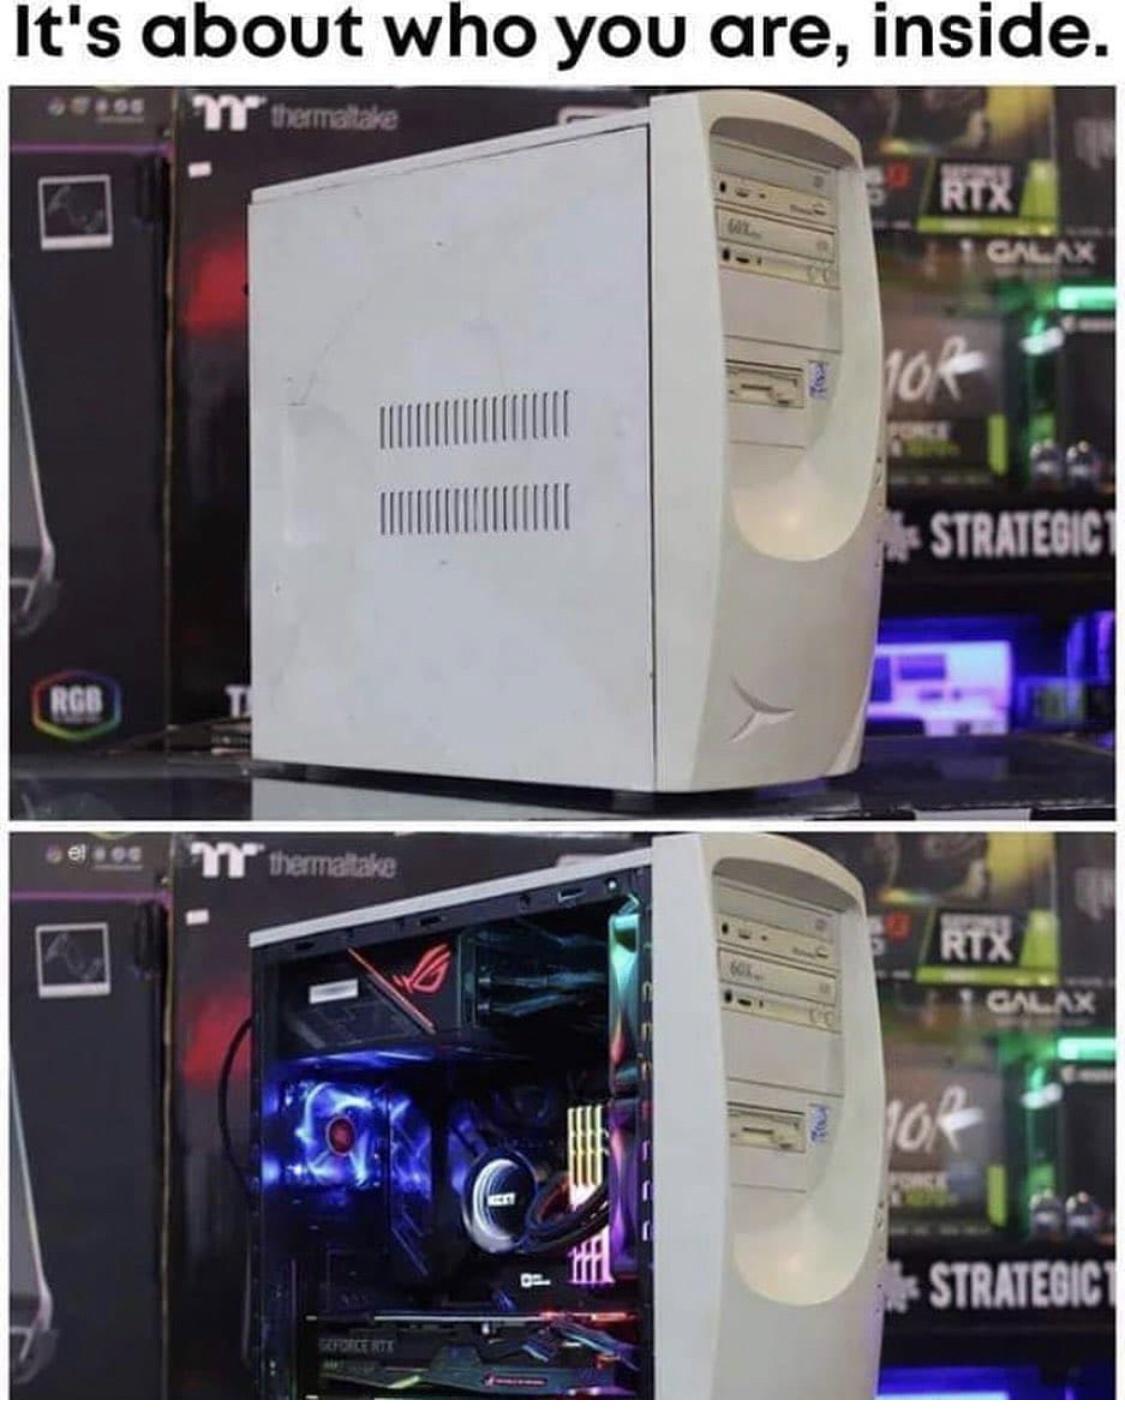 funny gaming memes - pc memes - It's about who you are, inside. Thermaltake Rix Galax T 108 Strategic Rgb Ti eles Tt thermaltake L. Rix Galax 7102 STRATEGIC1